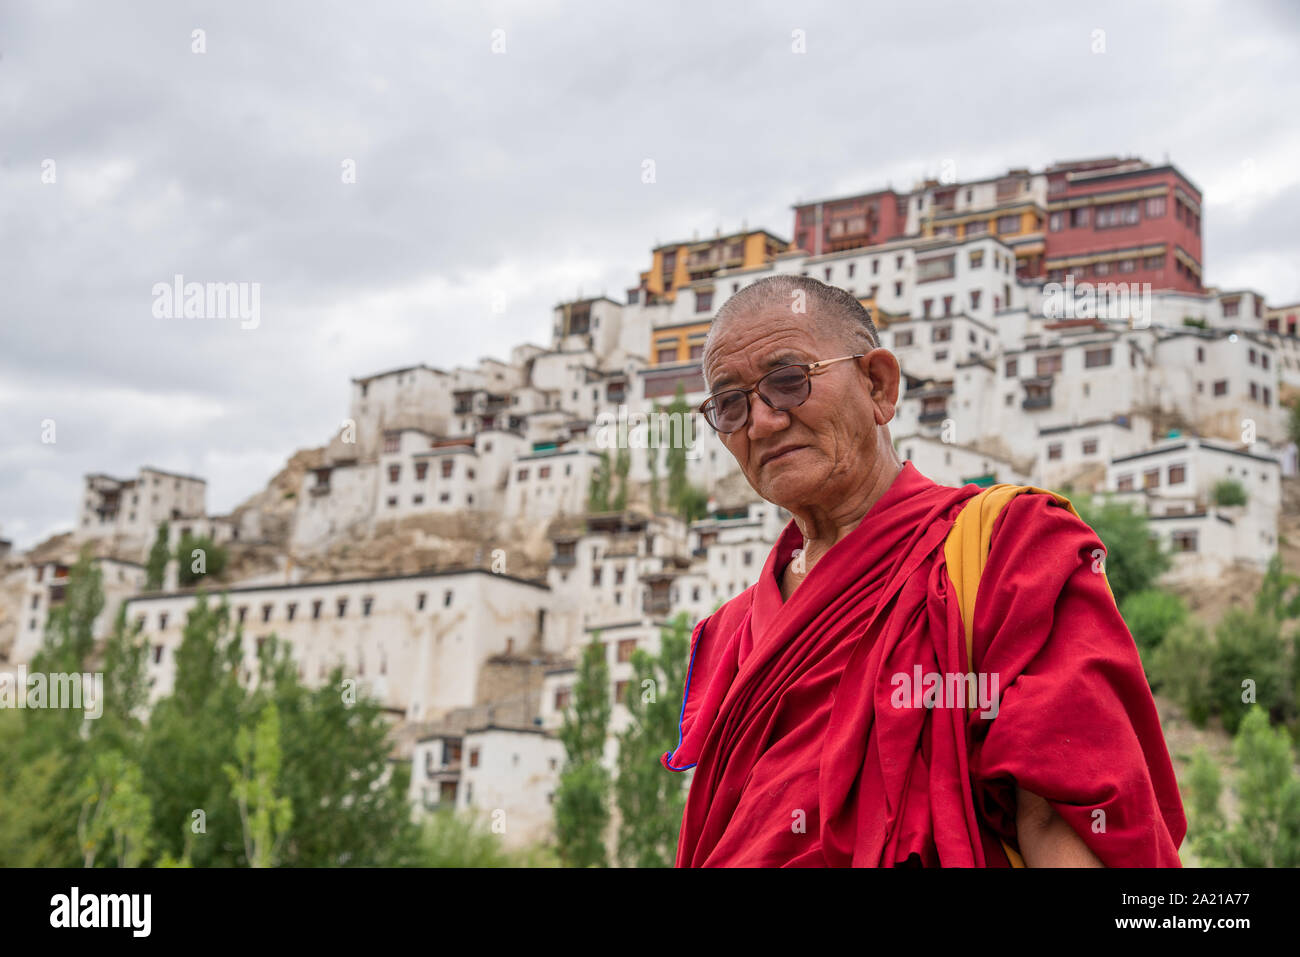 view at Thiksay monastery in Ladakh, India Stock Photo